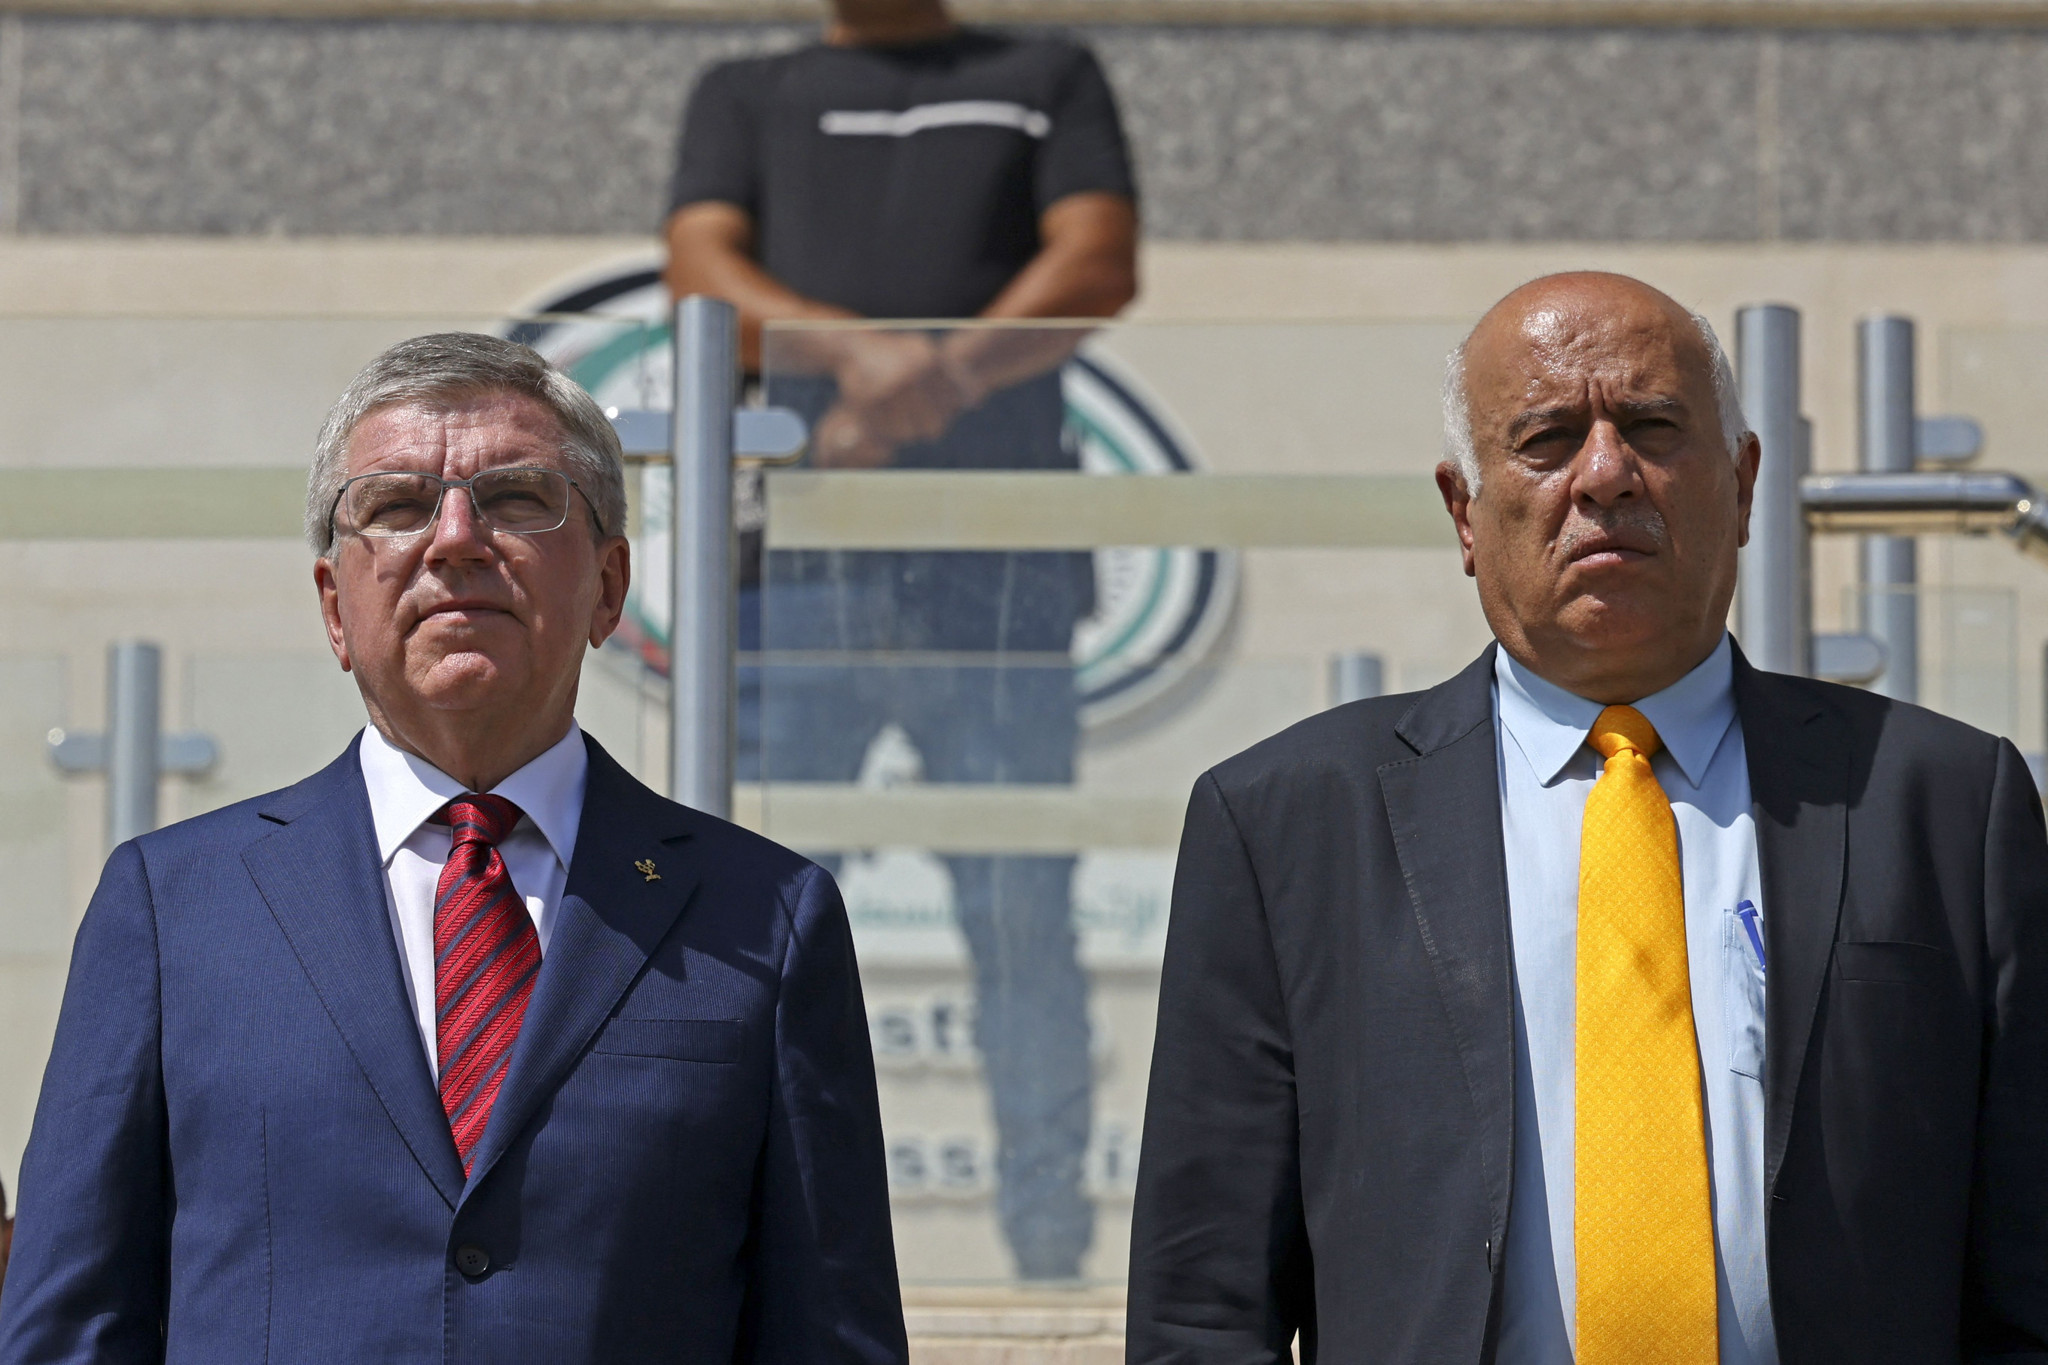 IOC President Thomas Bach, left, was welcomed to Palestine by his POC counterpart Major General Jibril Mahmoud Muhammad Rajoub, right ©Getty Images